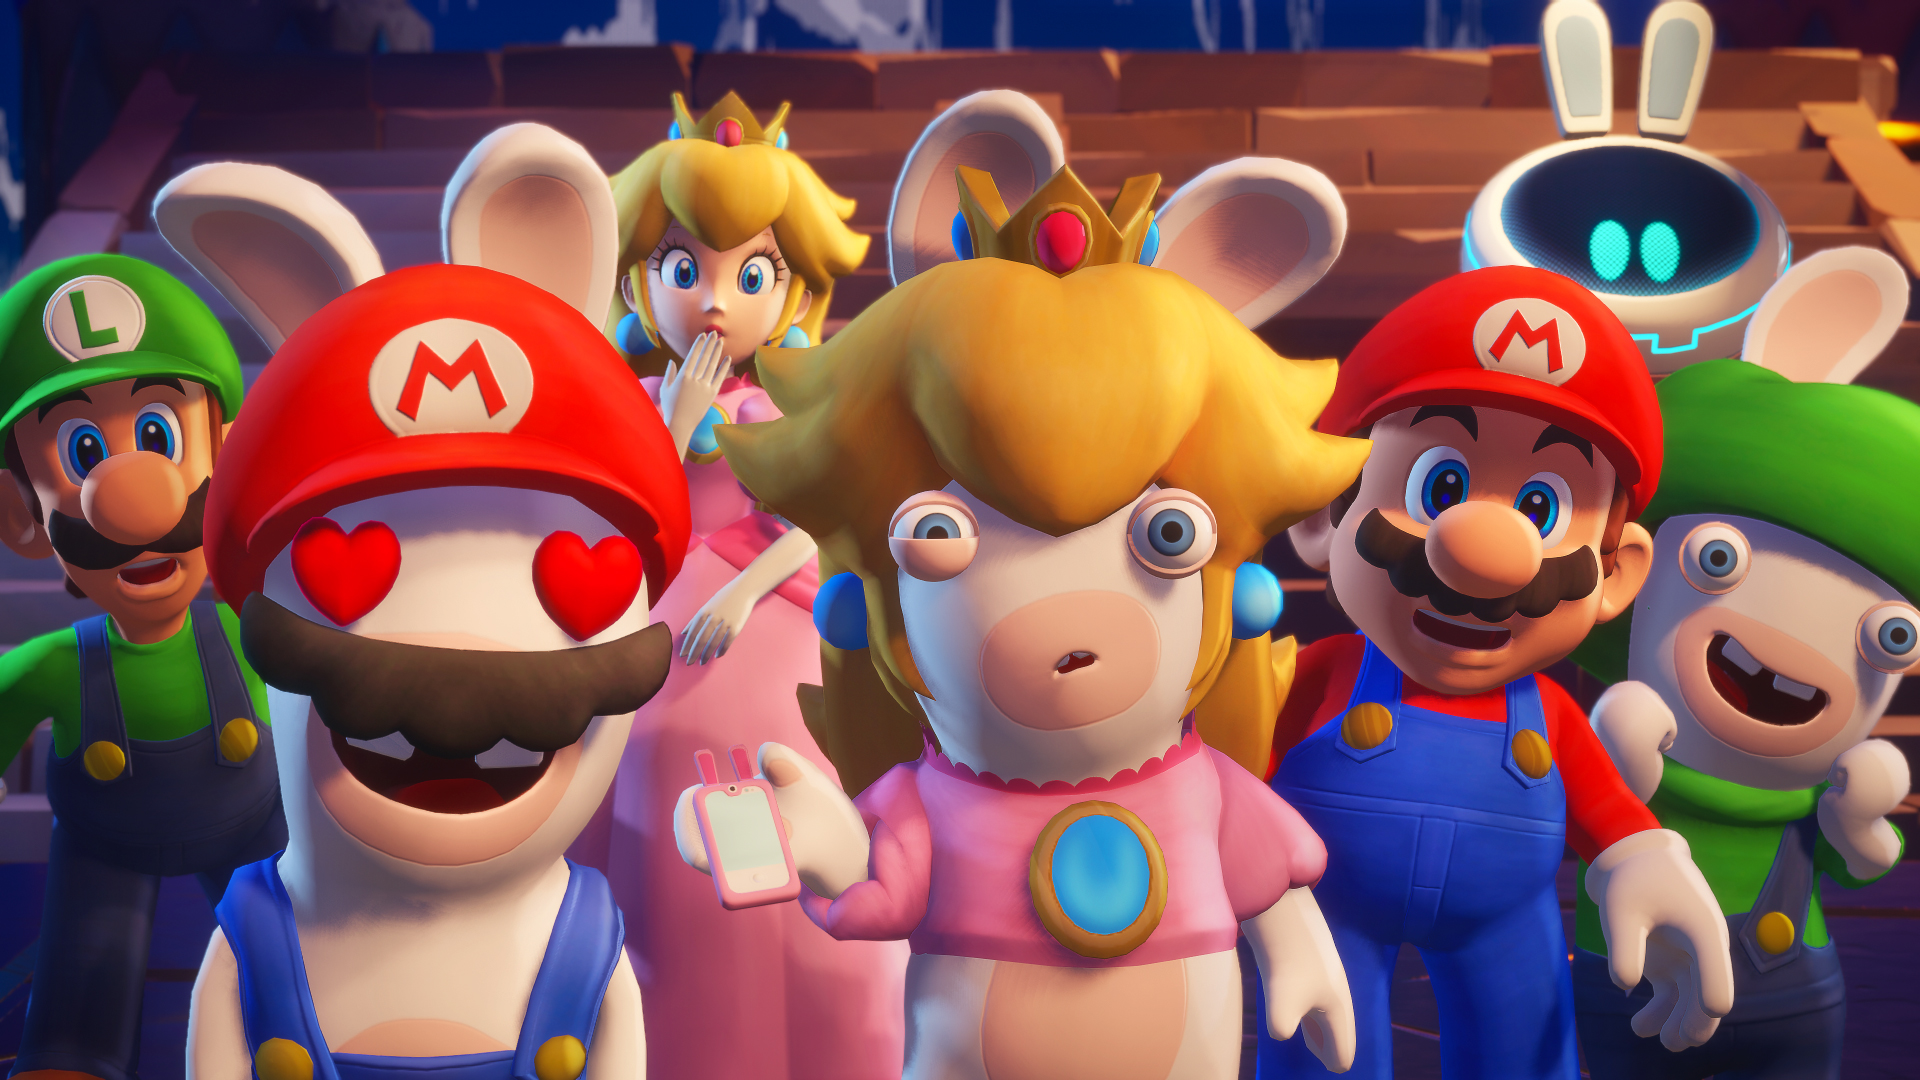 best Nintendo Switch games: Mario, Luigi, Peach and their Rabbid counterparts looking at something